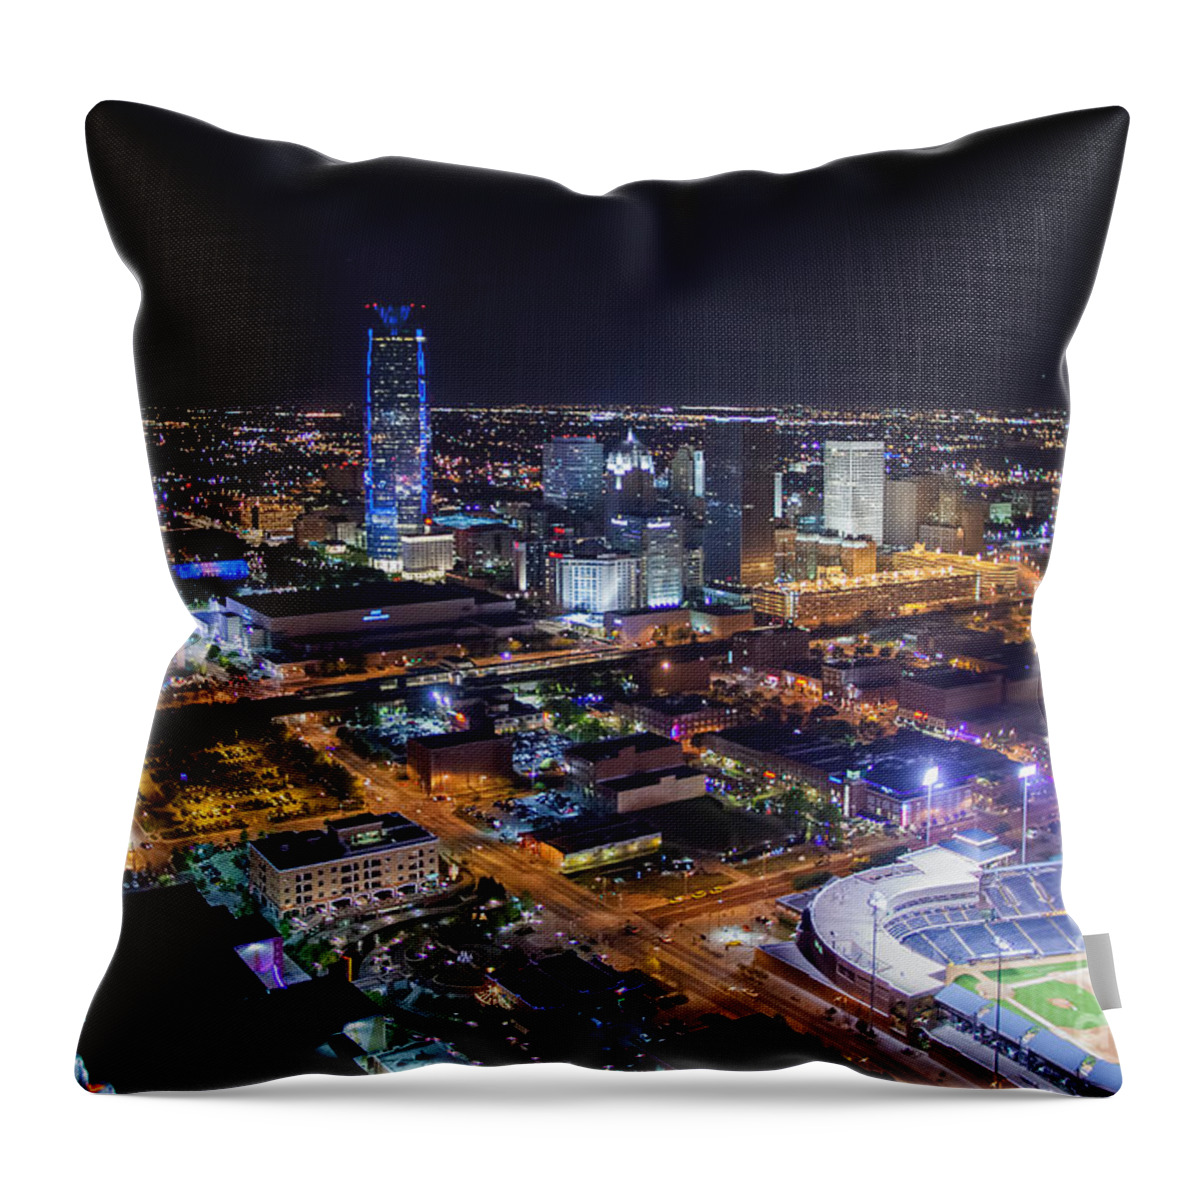 Oklahoma City Throw Pillow featuring the photograph Oks00510 by Cooper Ross